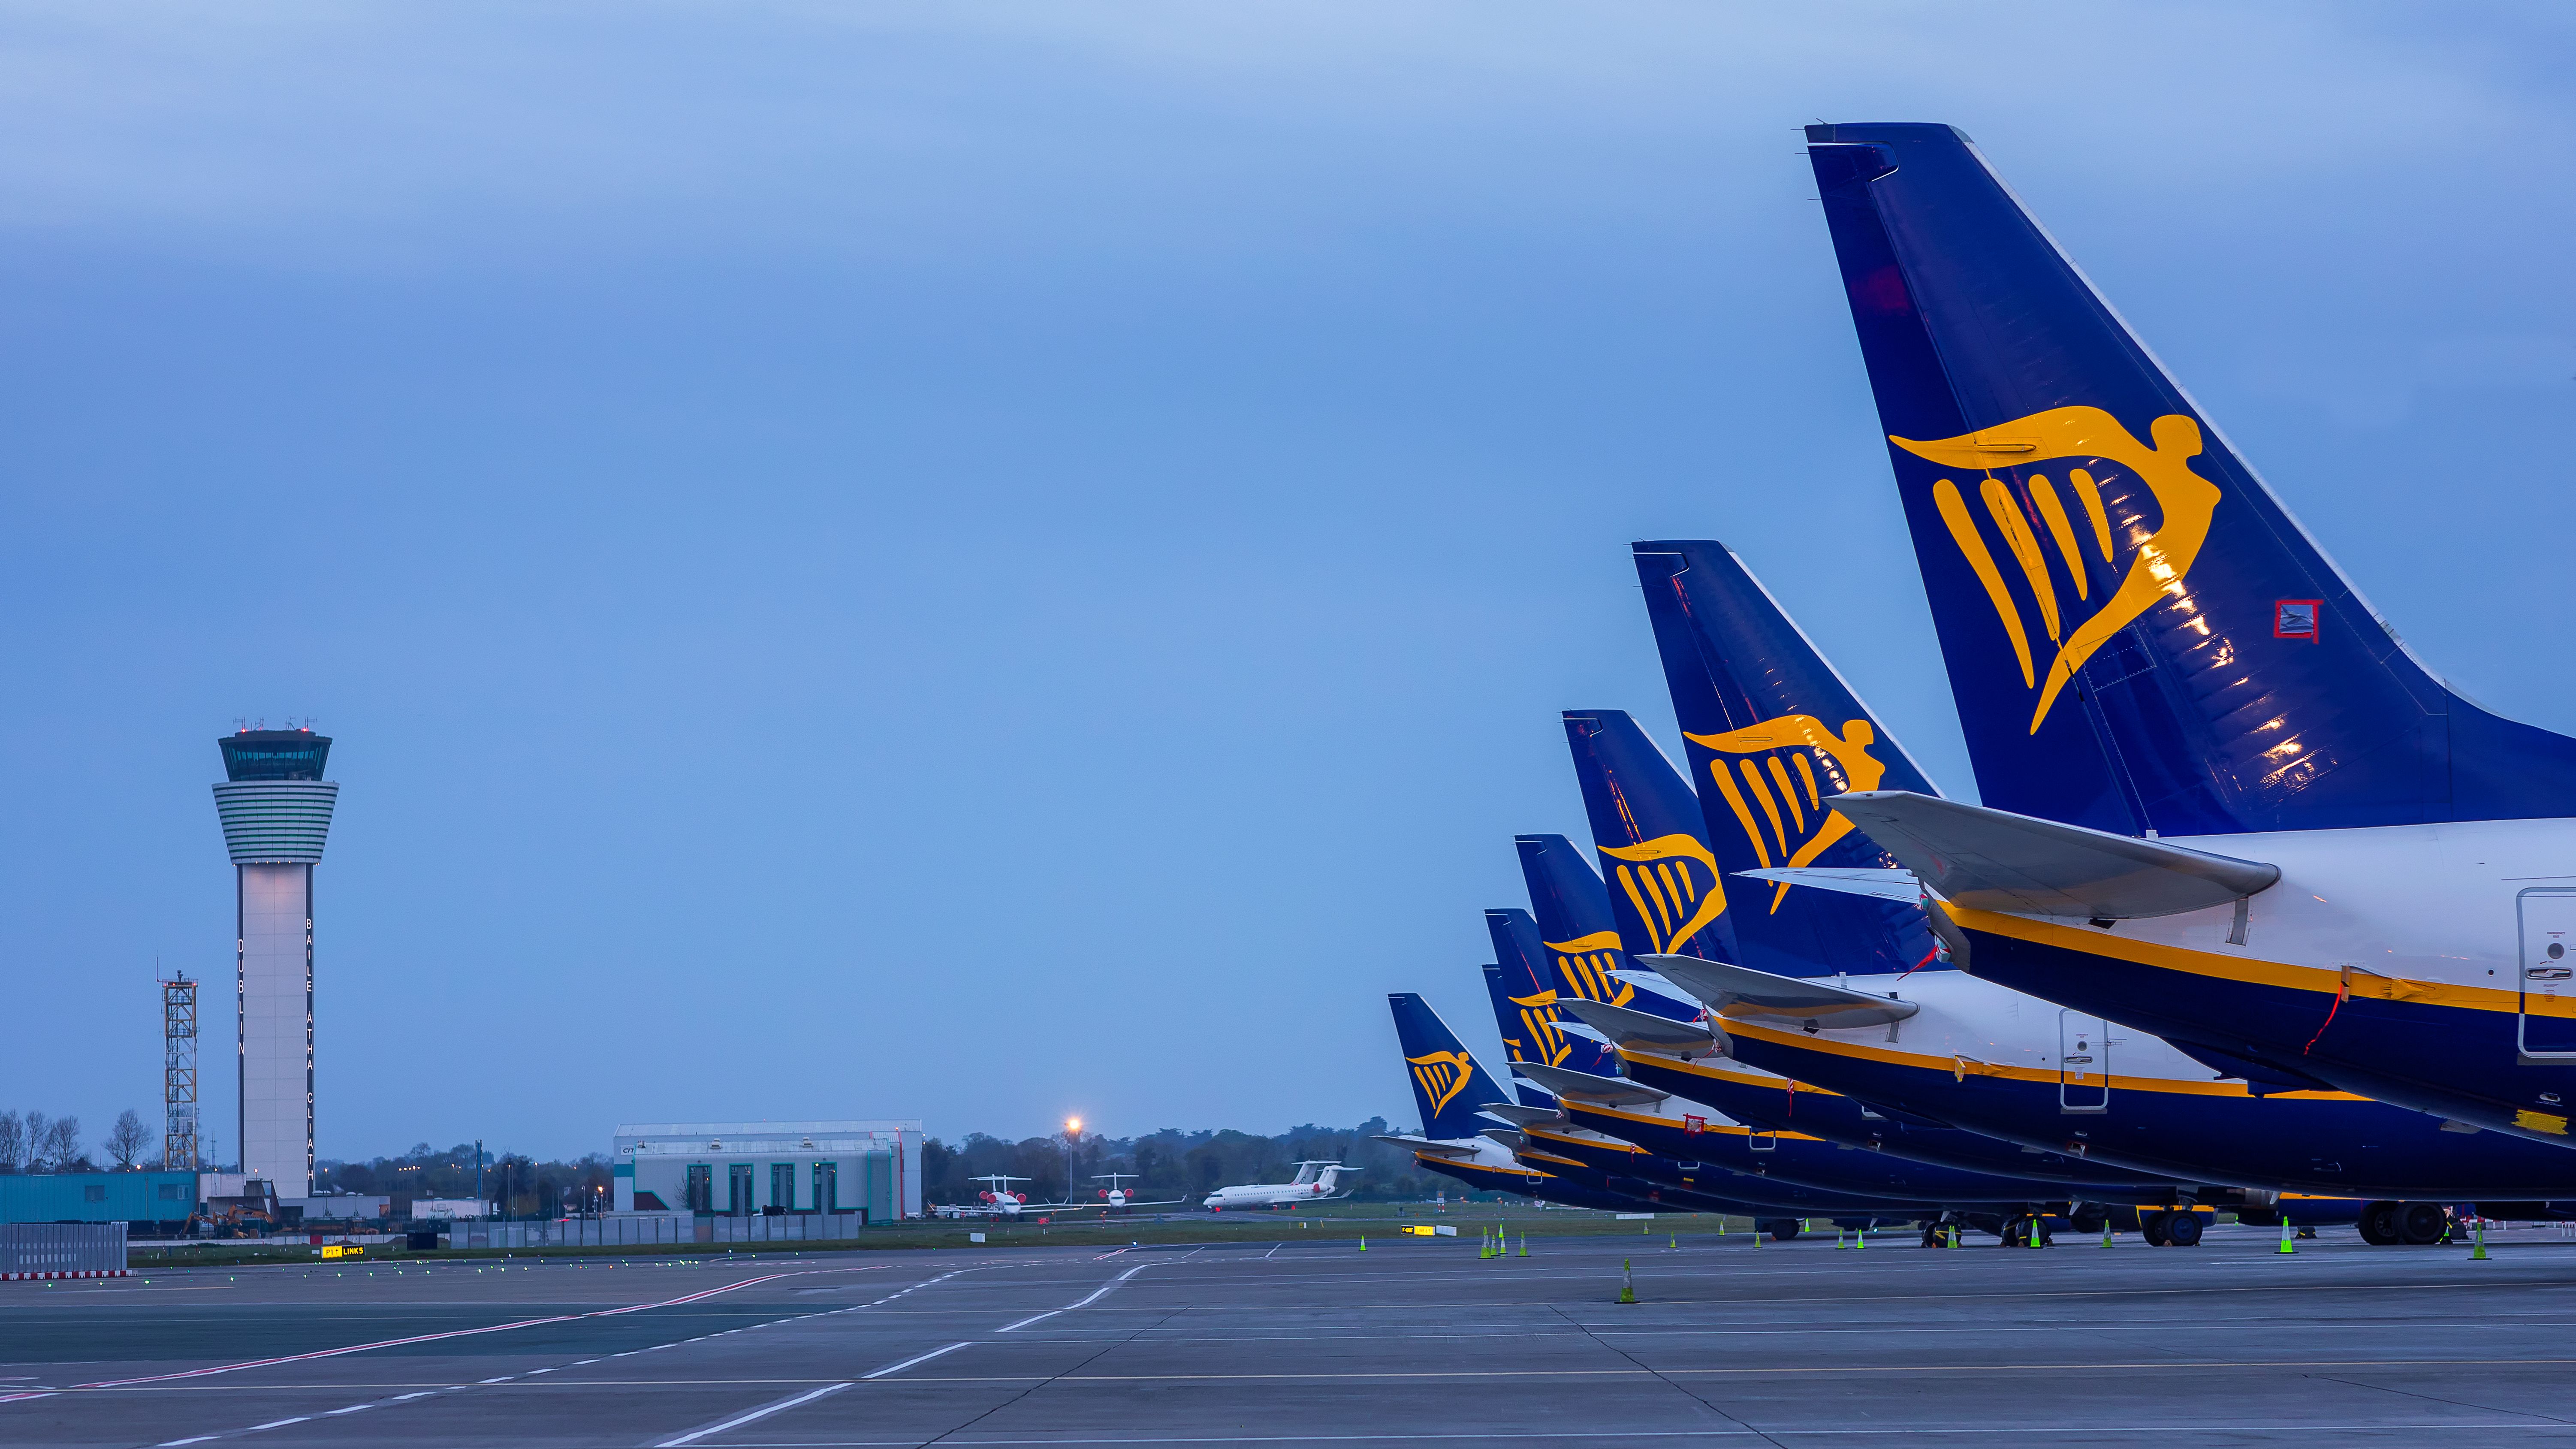 Many Ryanair Boeing 737s parked in a line at Dublin Airport.